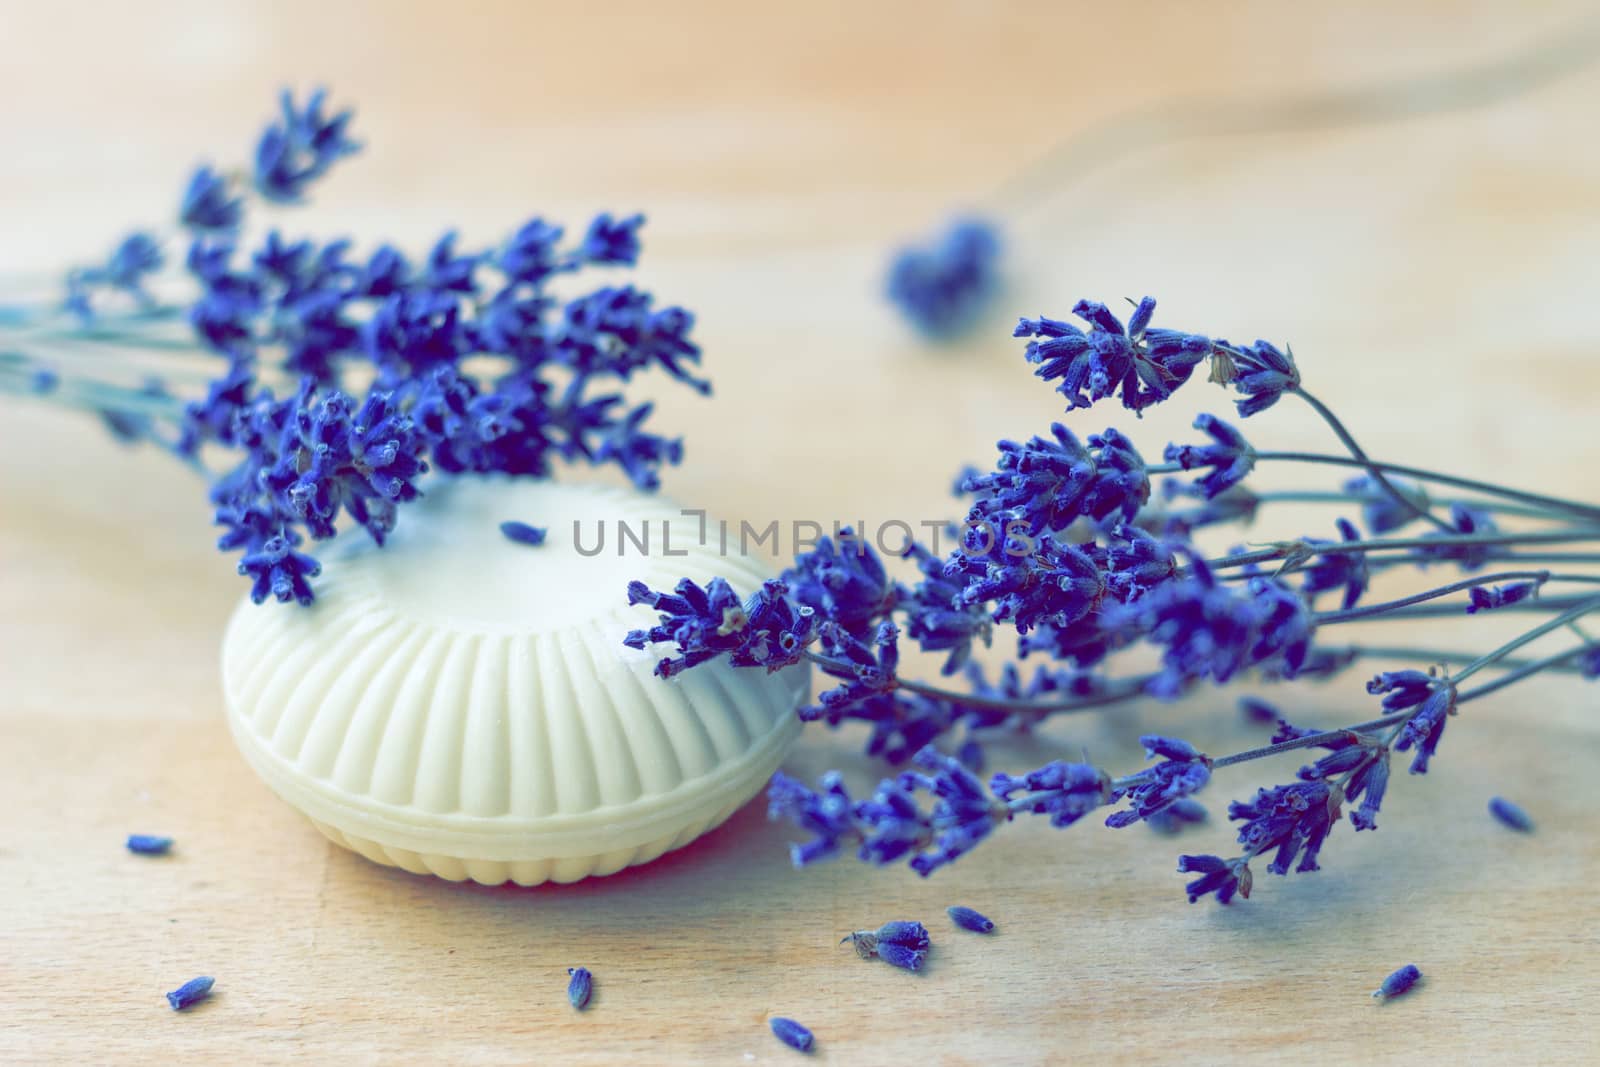 Soap and lavender flowers by Kidza